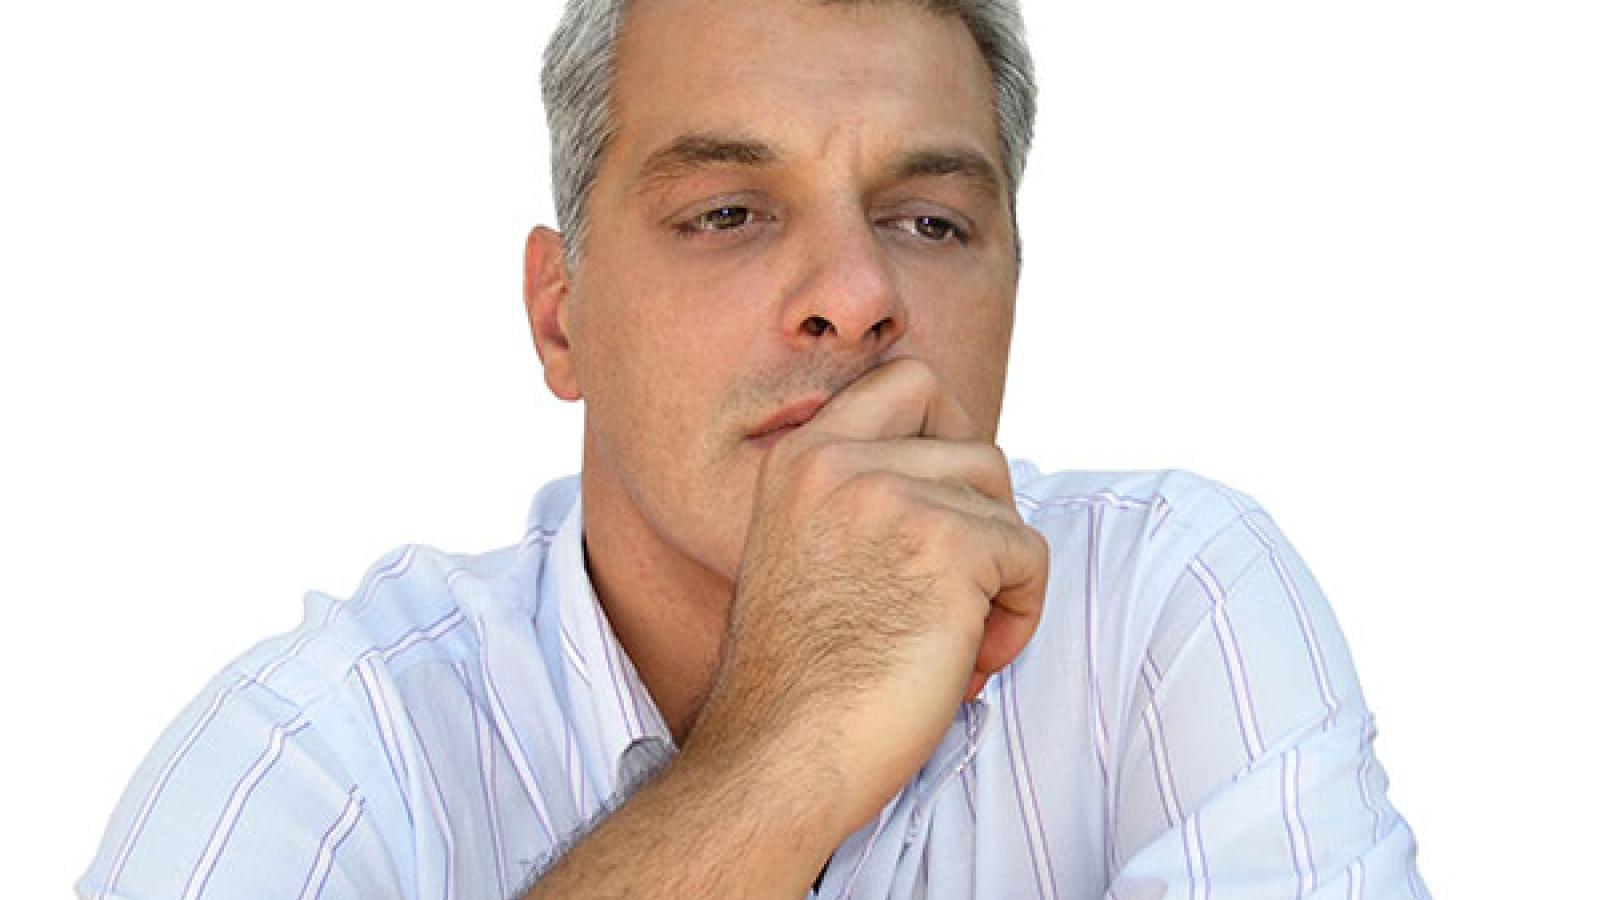 What is Male Menopause?